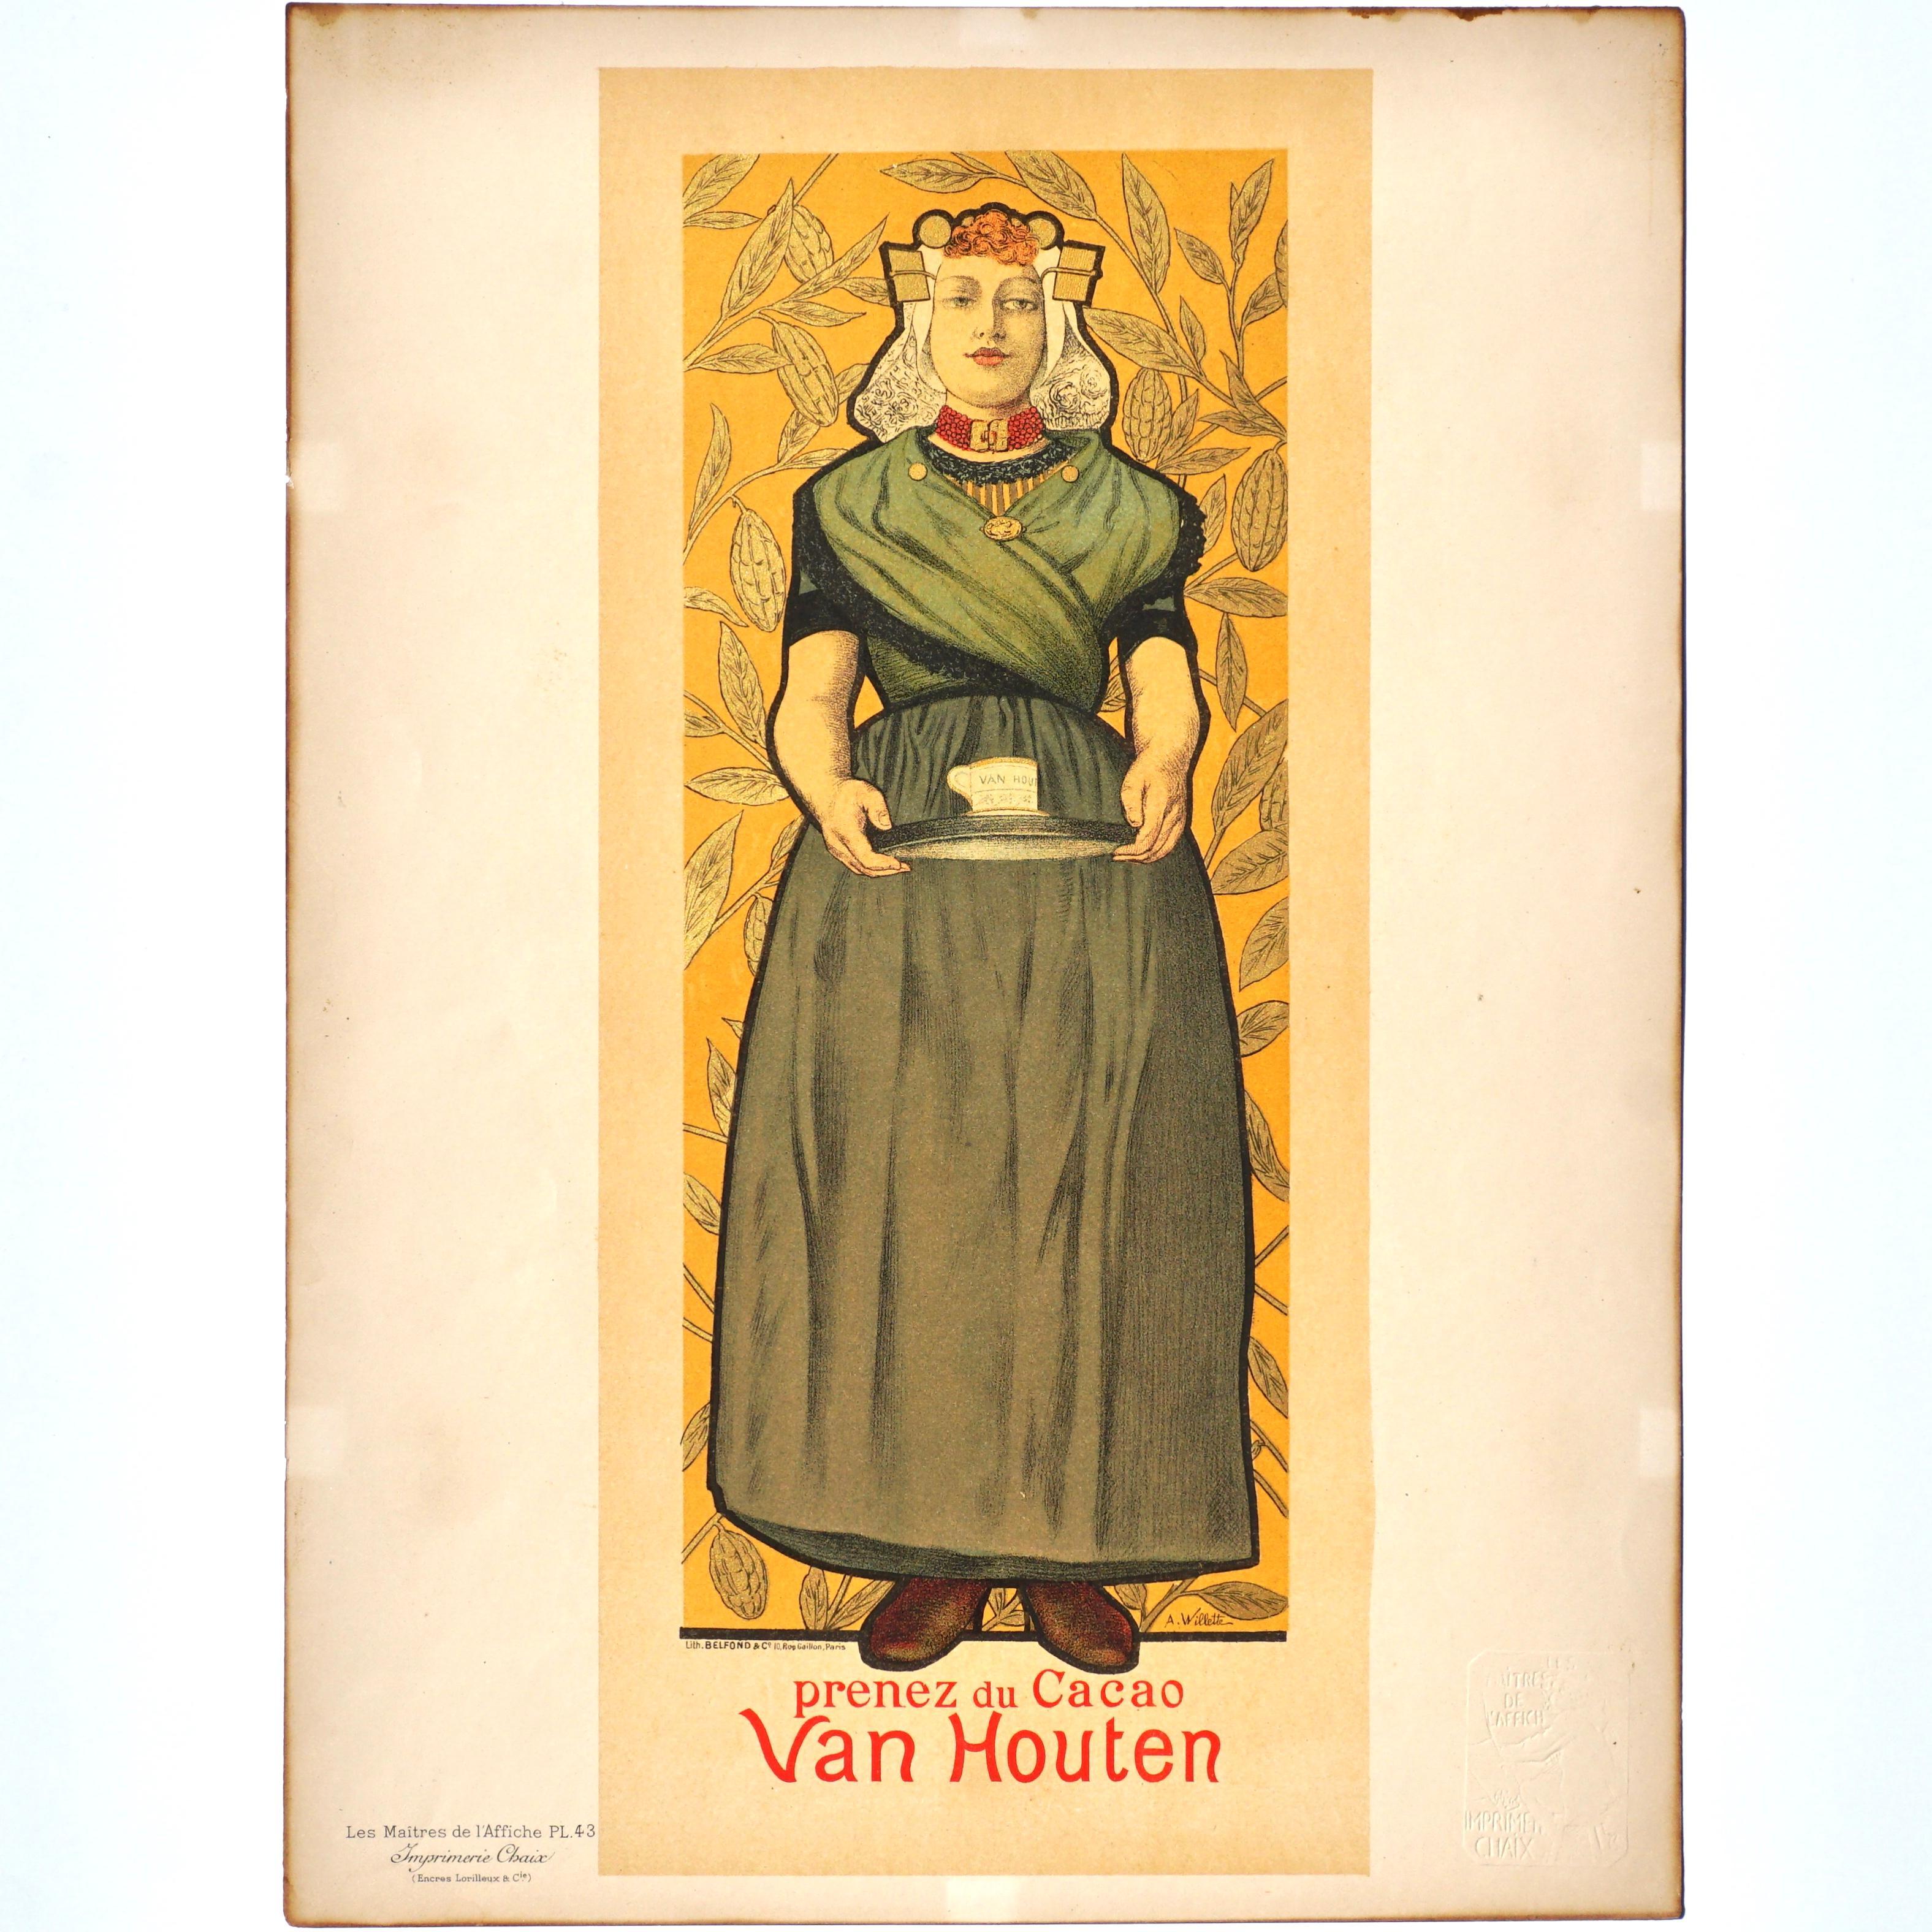 Adolph Willette “Cacao Van Houten” Original 1896 Poster Chaix - Print by Adolphe Willette